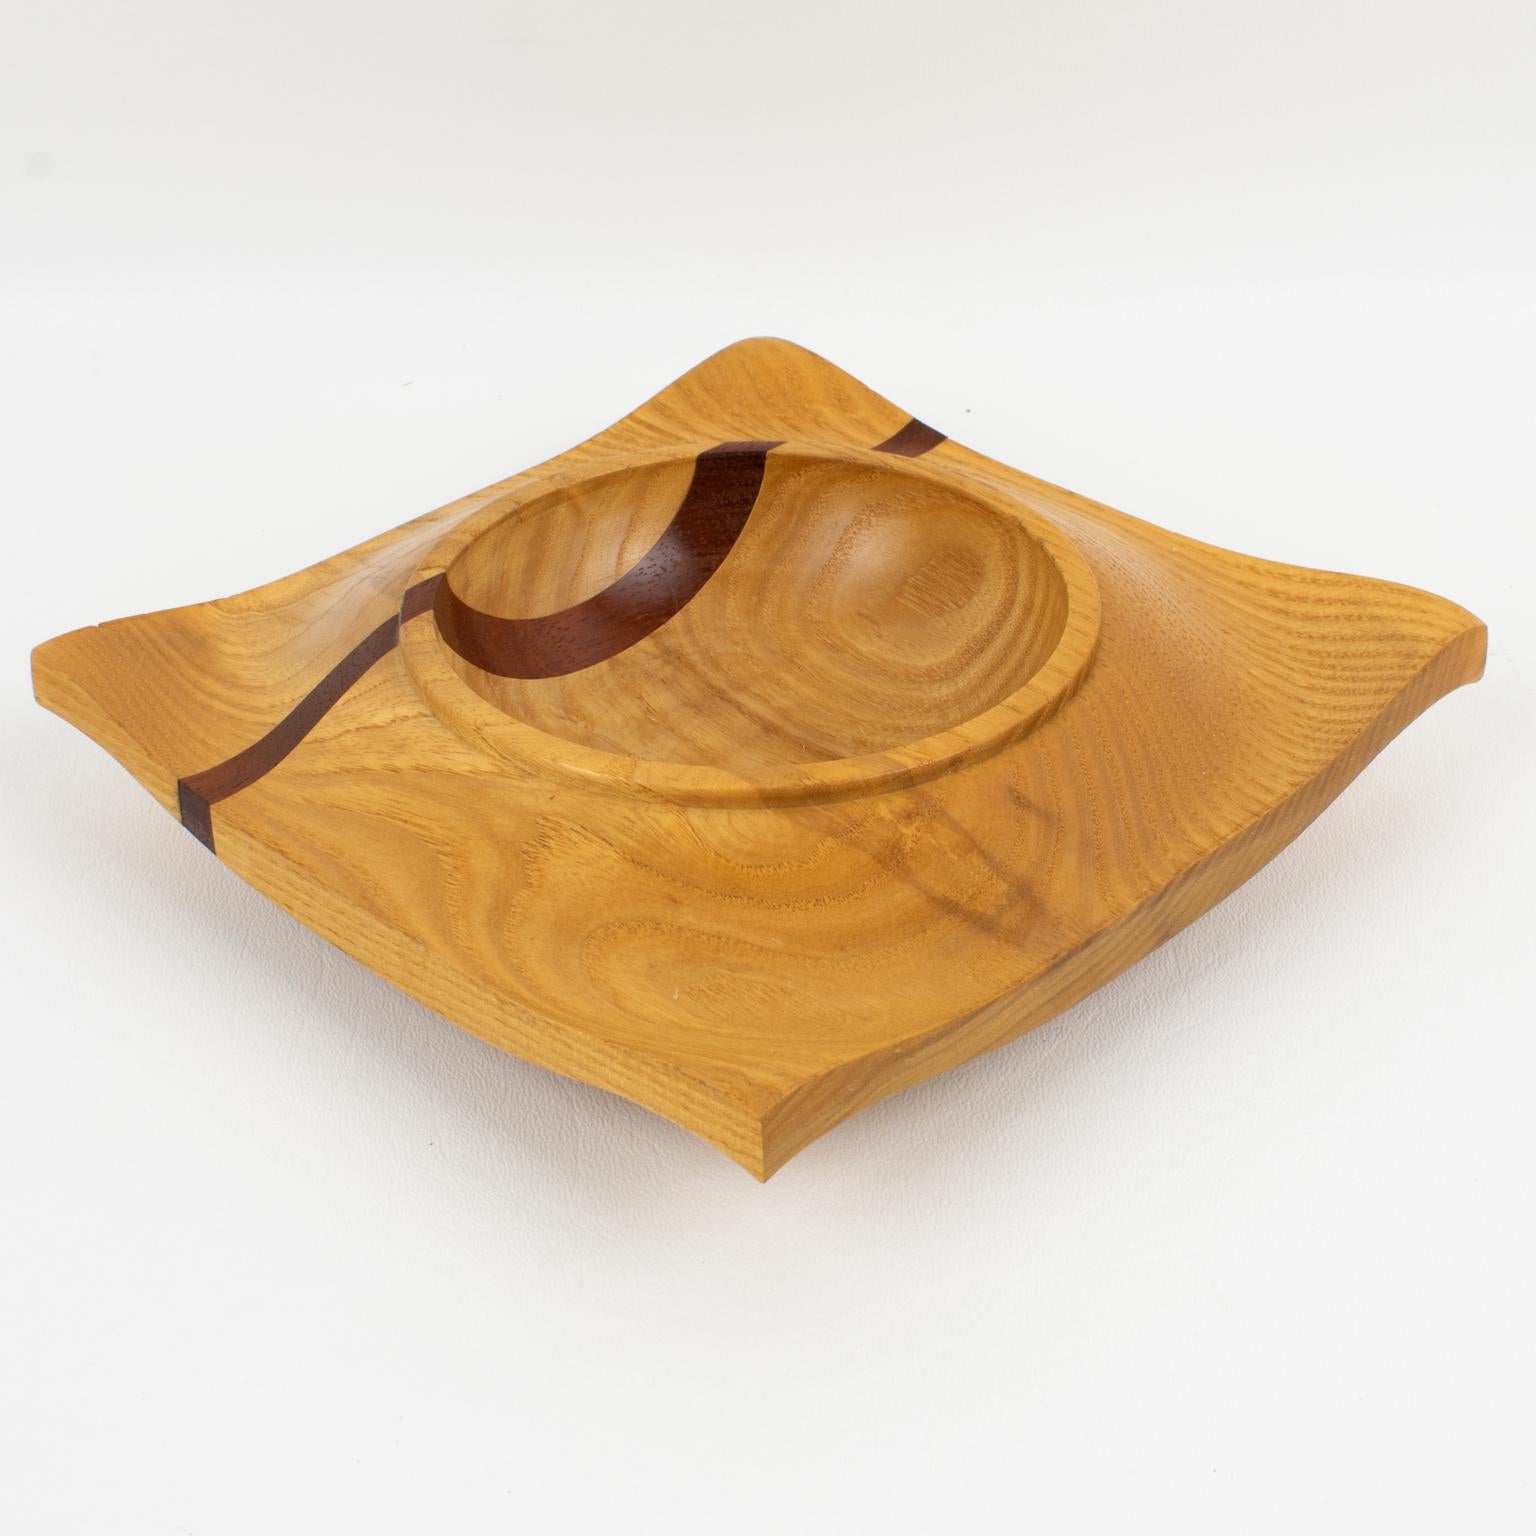 Space Age Danish Carved Wood Bowl Centerpiece Catchall Vide Poche, 1980s For Sale 2